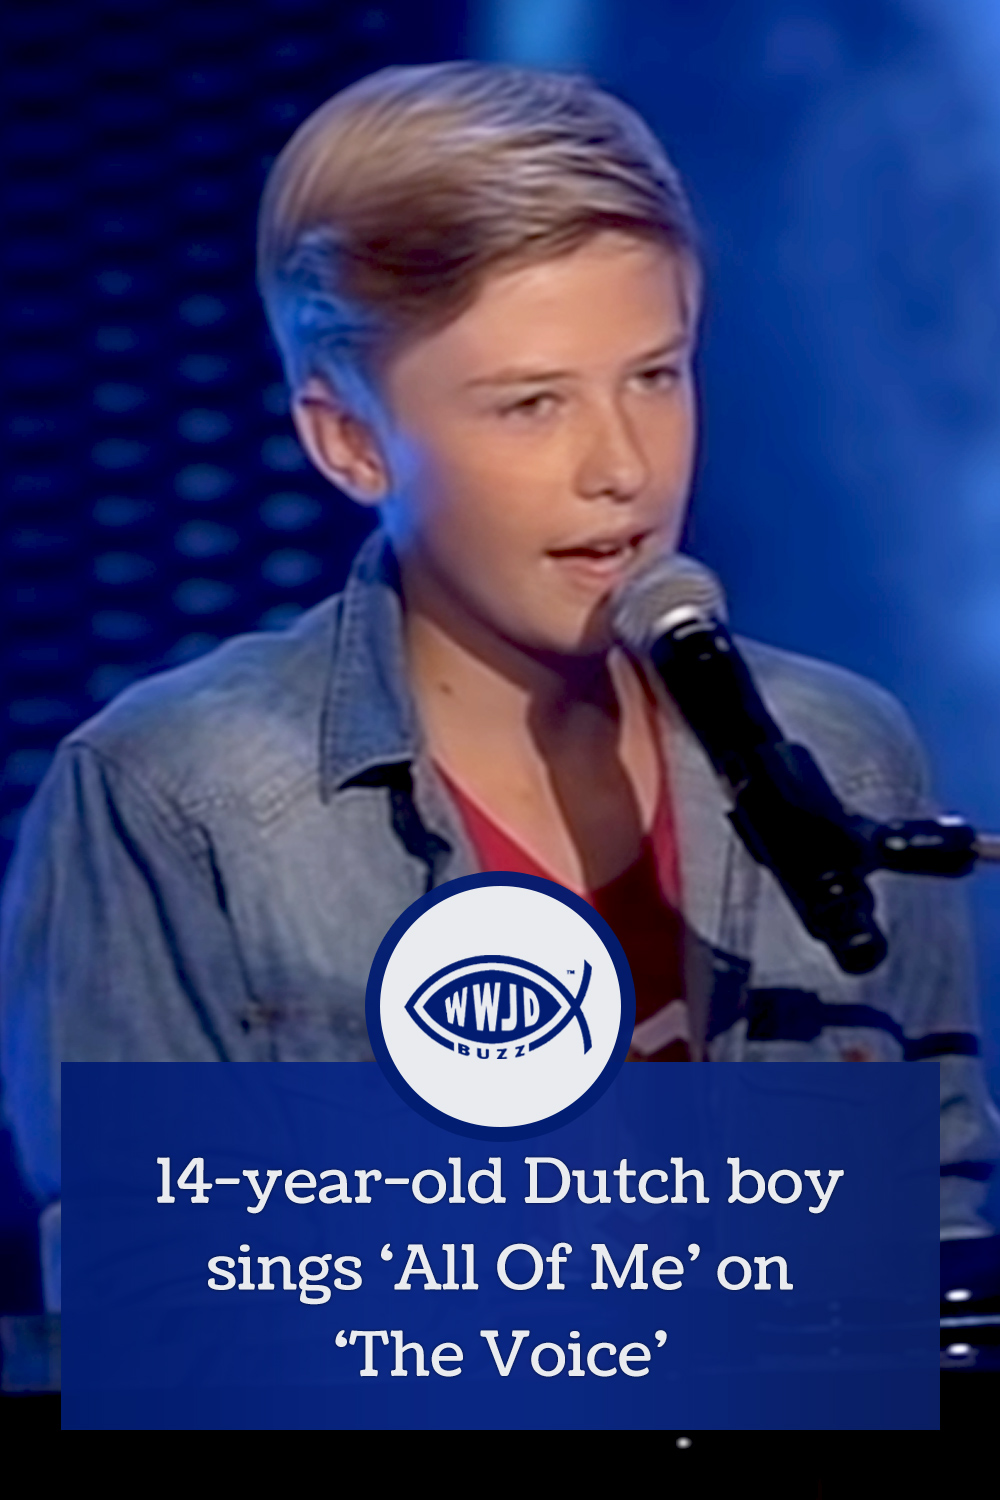 14-year-old Dutch boy sings ‘All Of Me’ on ‘The Voice’